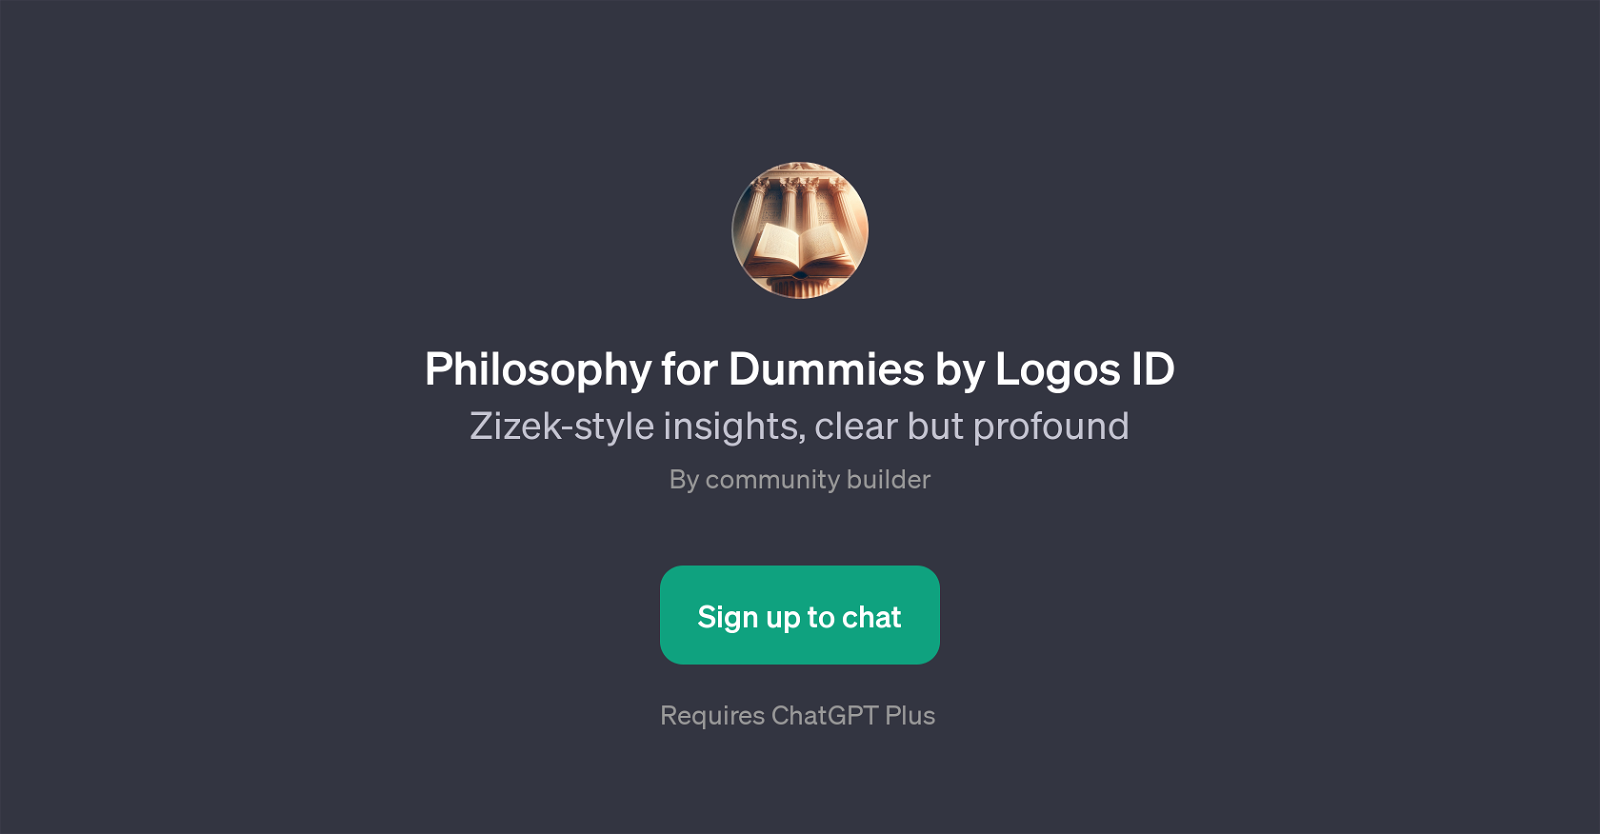 Philosophy for Dummies by Logos ID website